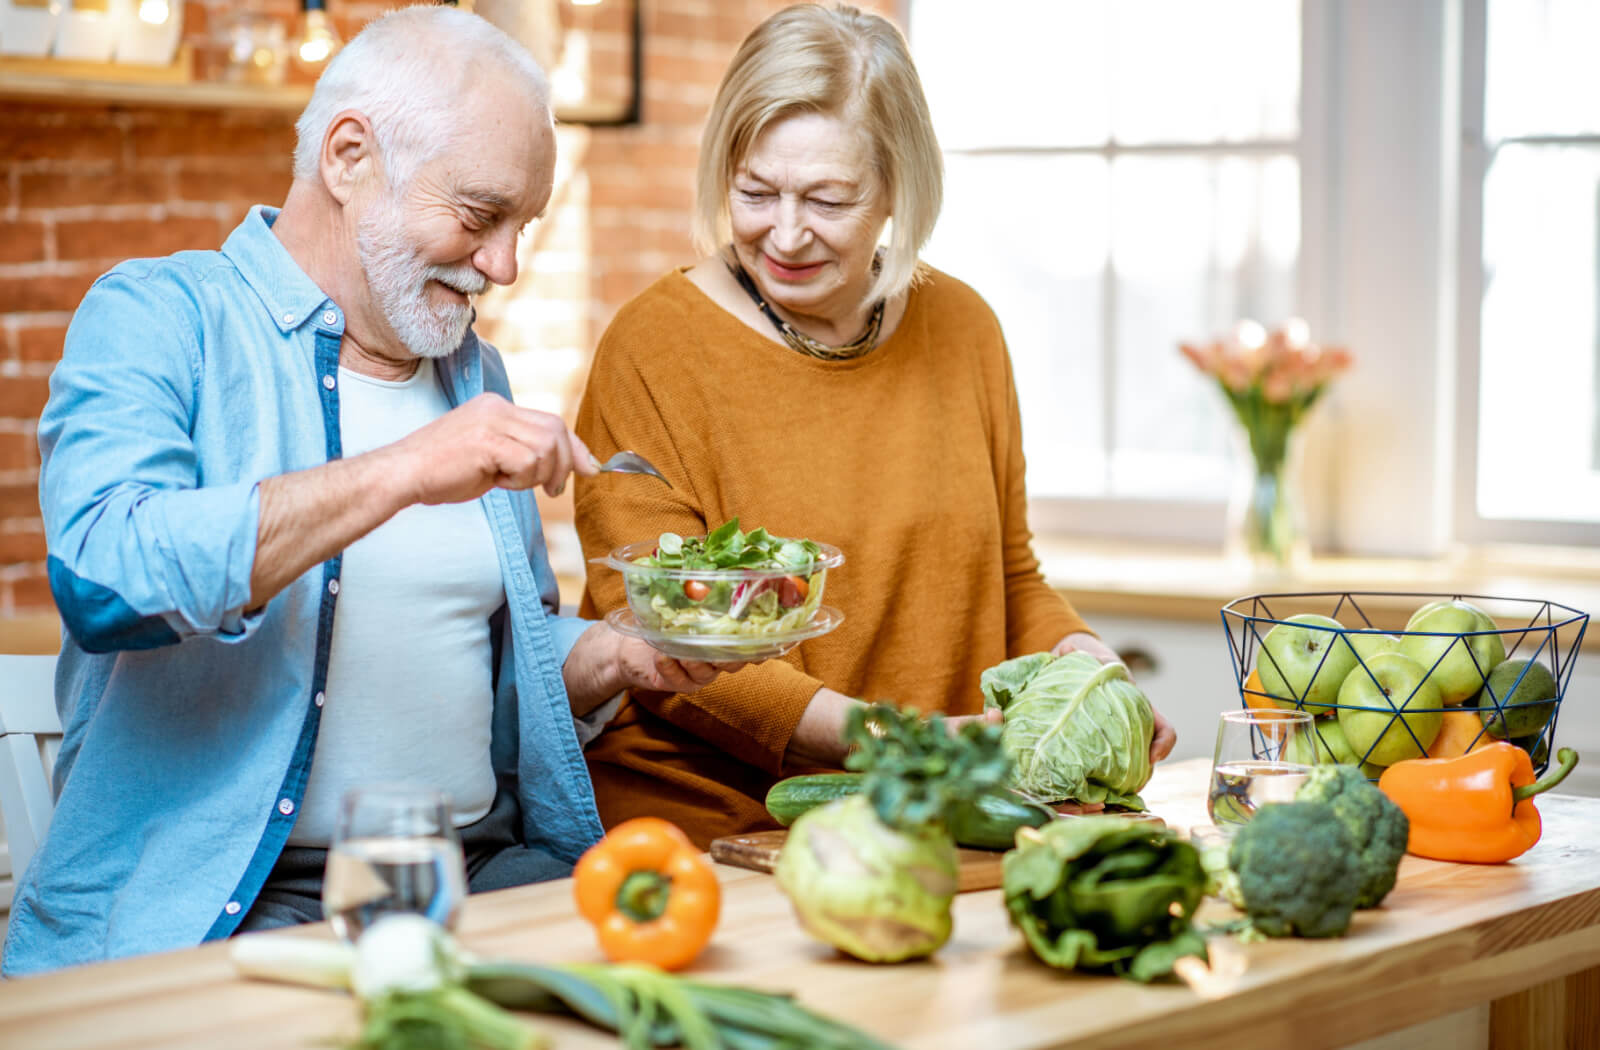 A senior man and a senior woman preparing a bowl of salad in the kitchen.